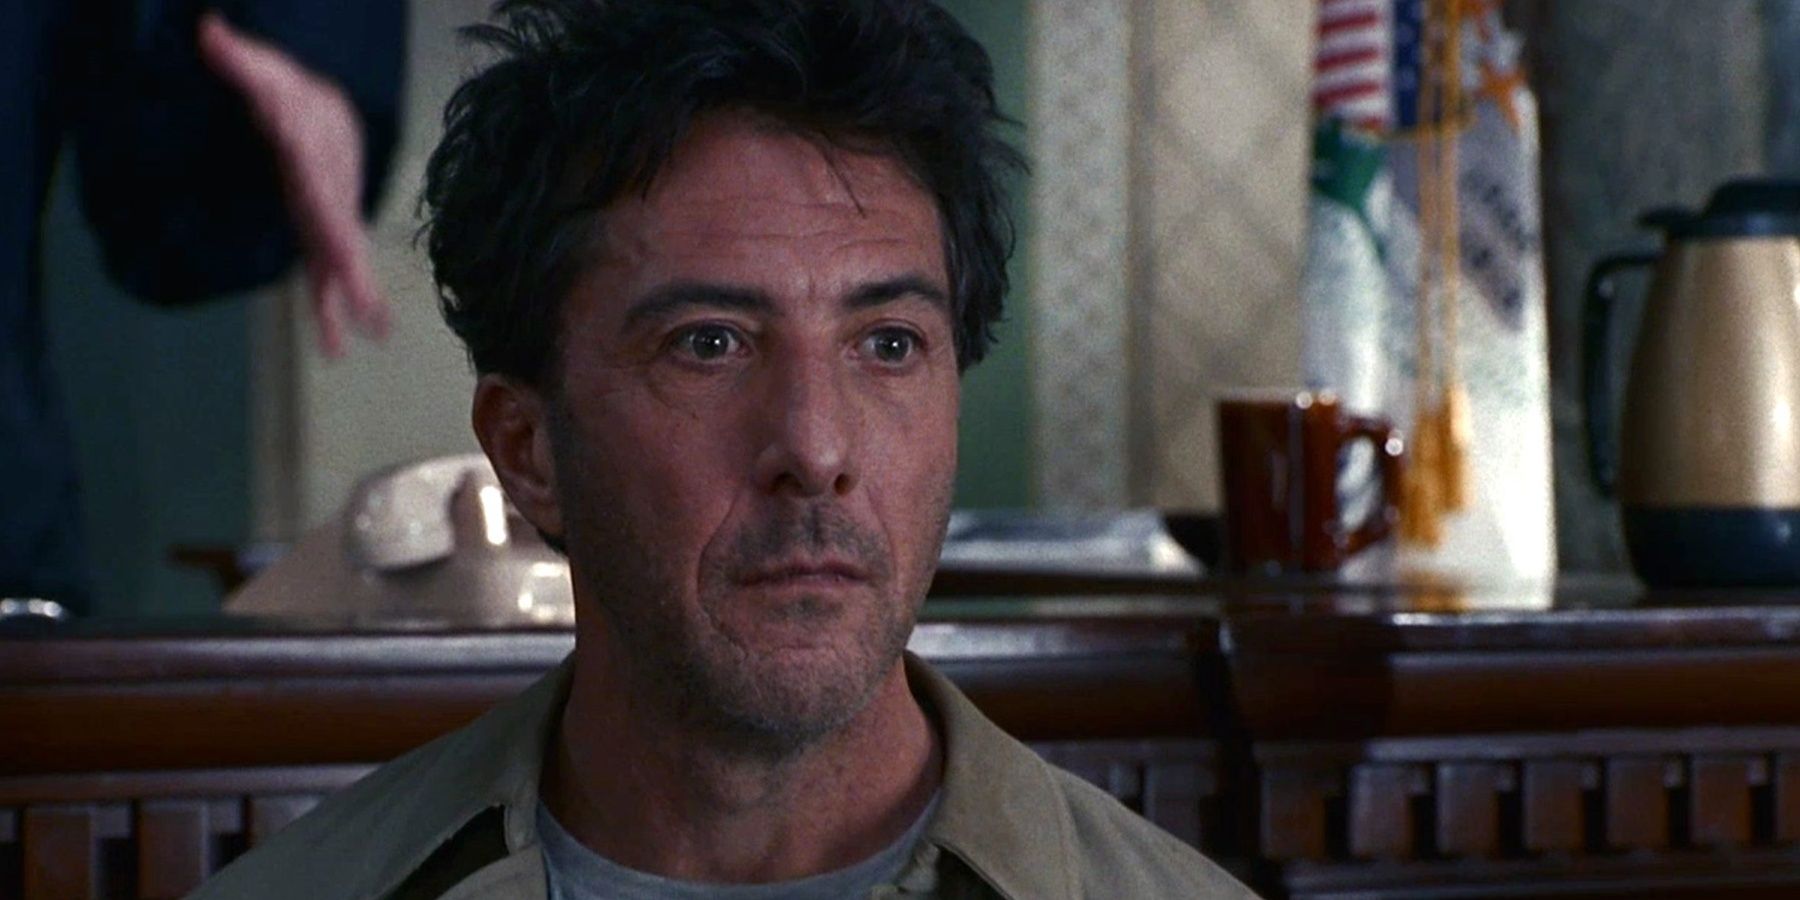 Dustin Hoffman looking sad and standing in courtroom